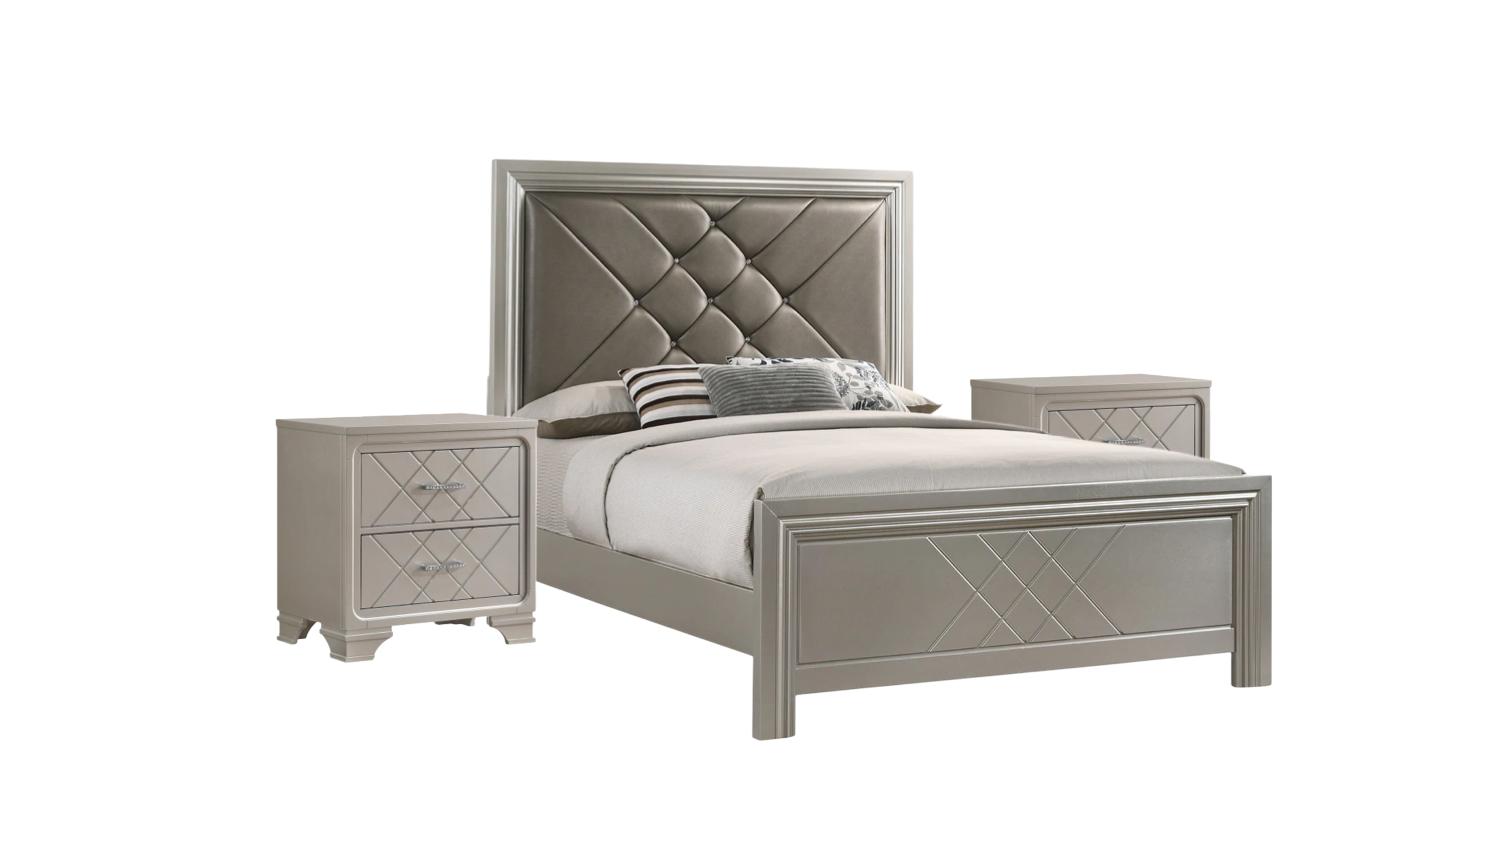 Modern Panel Bedroom Set Phoebe B6970-CK-Bed-3pcs in Silver, Champagne PU